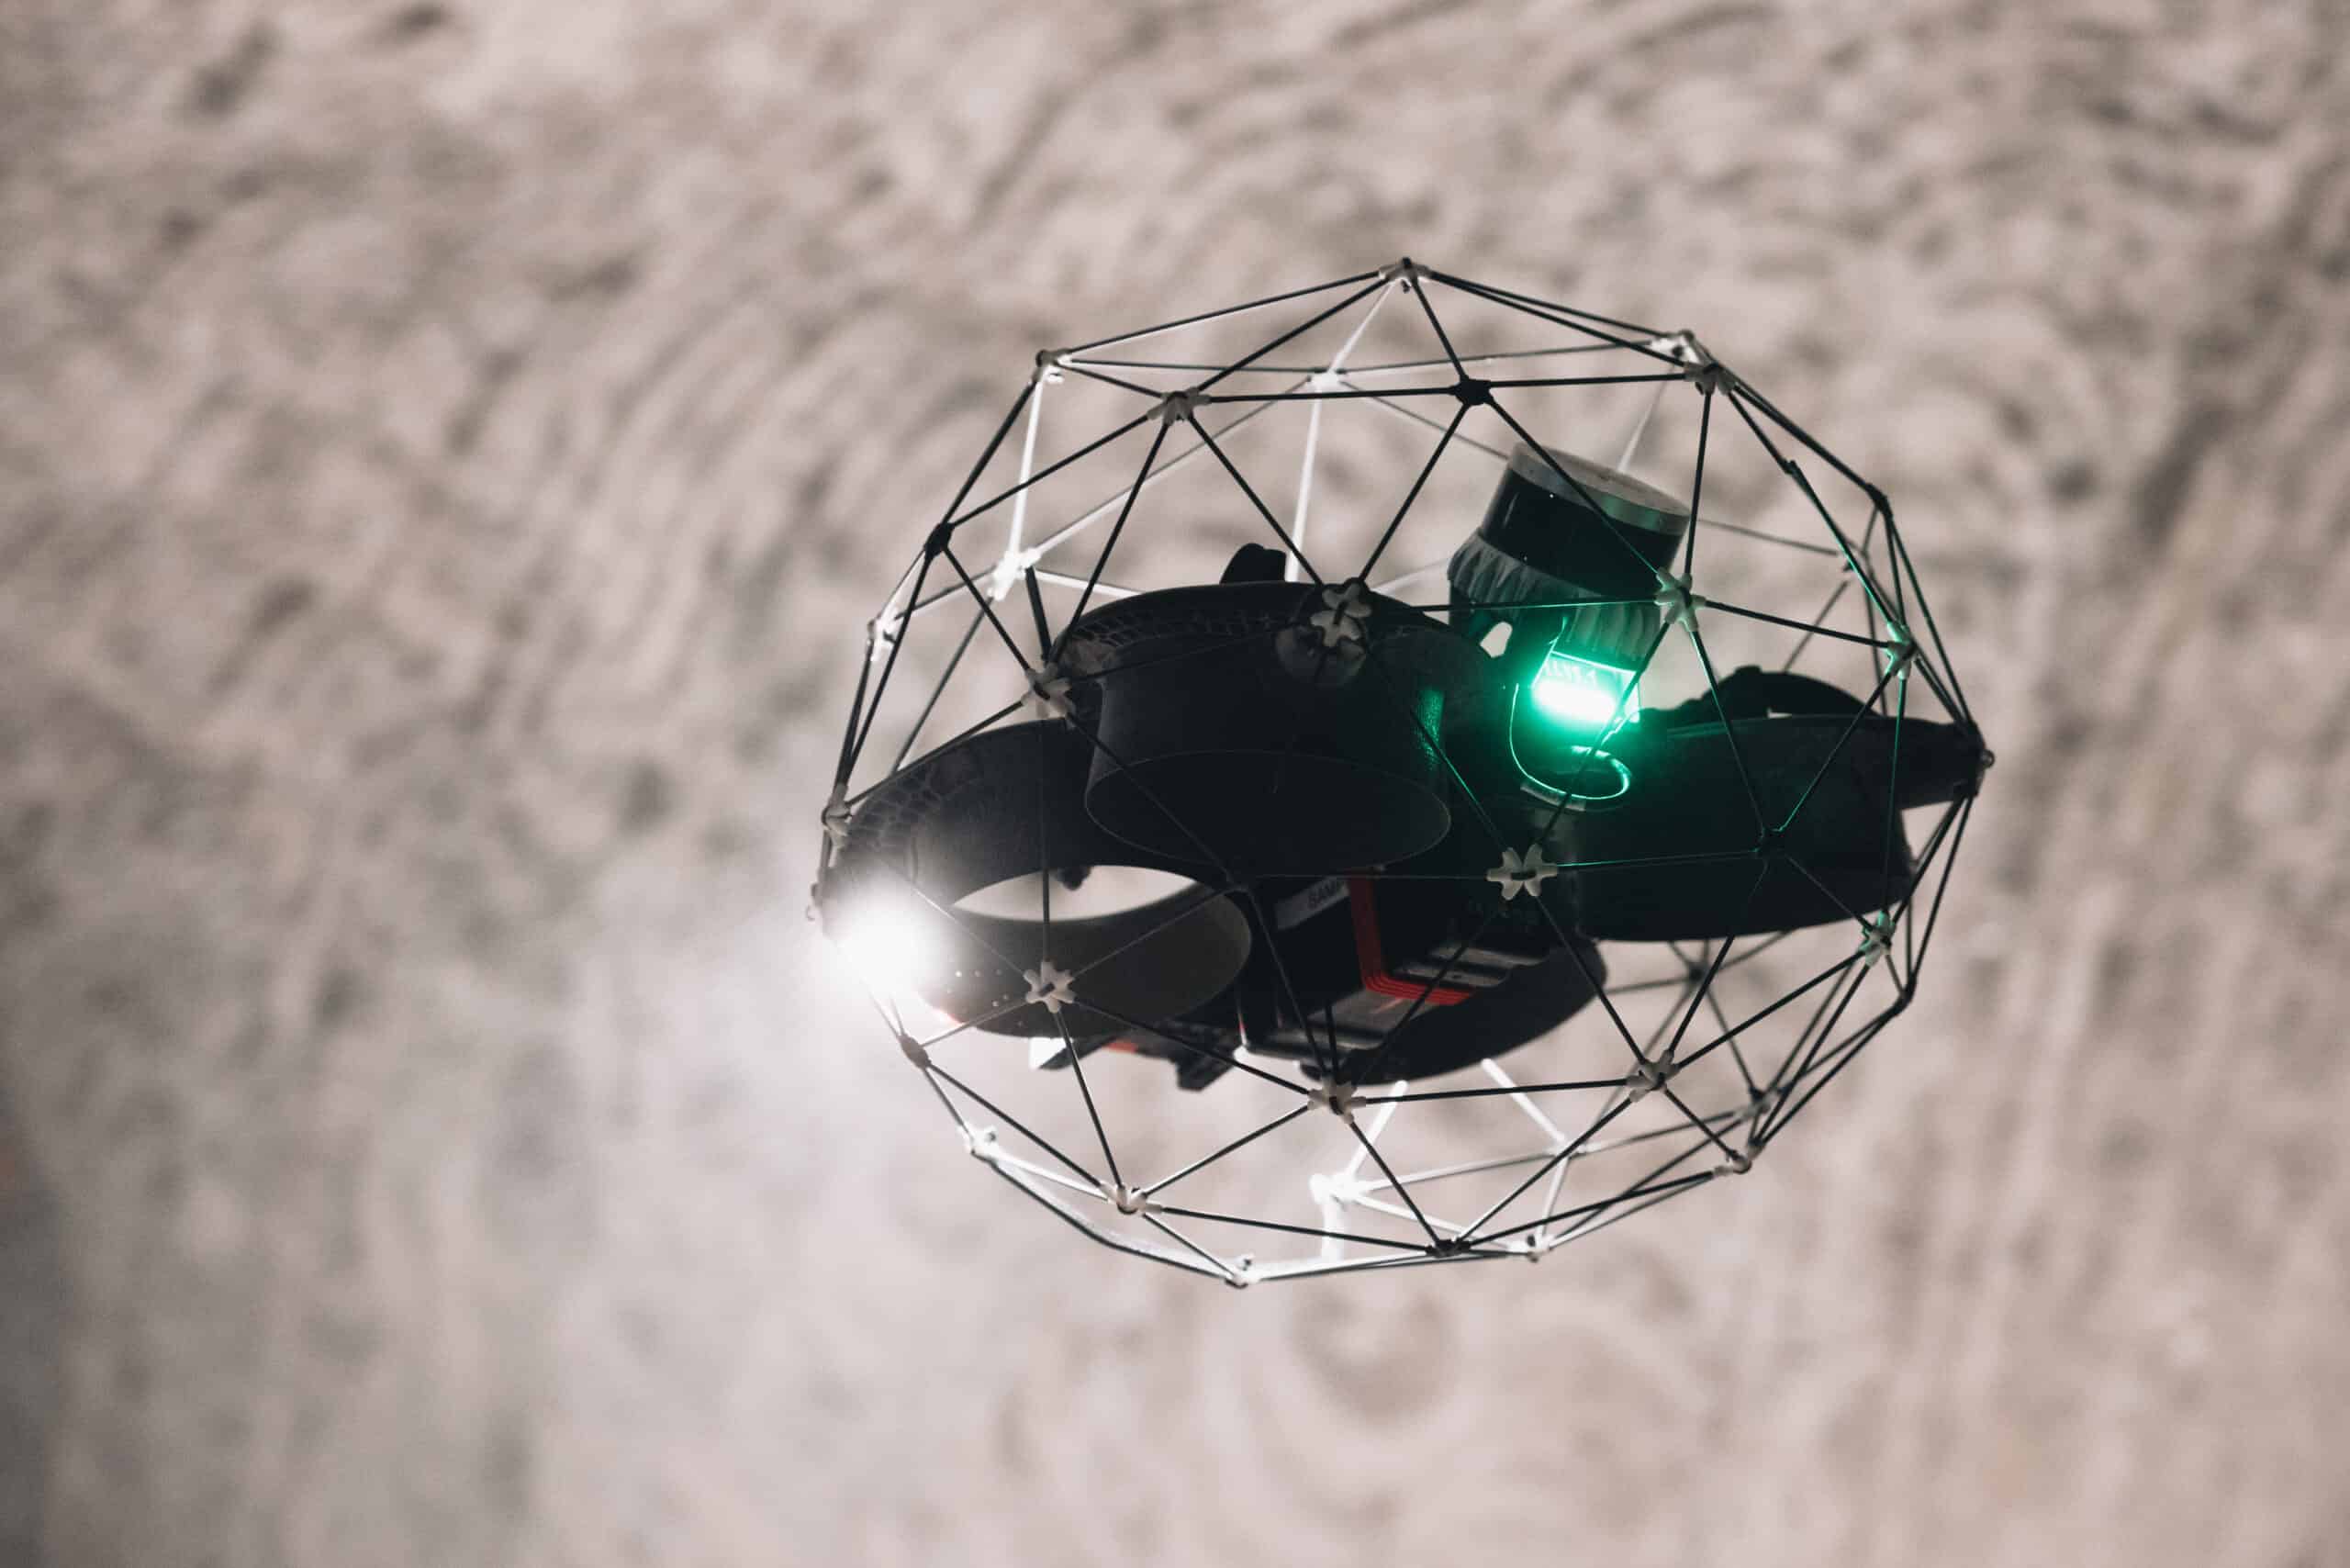 Dangerous places can now be inspected with drones made by Flyability